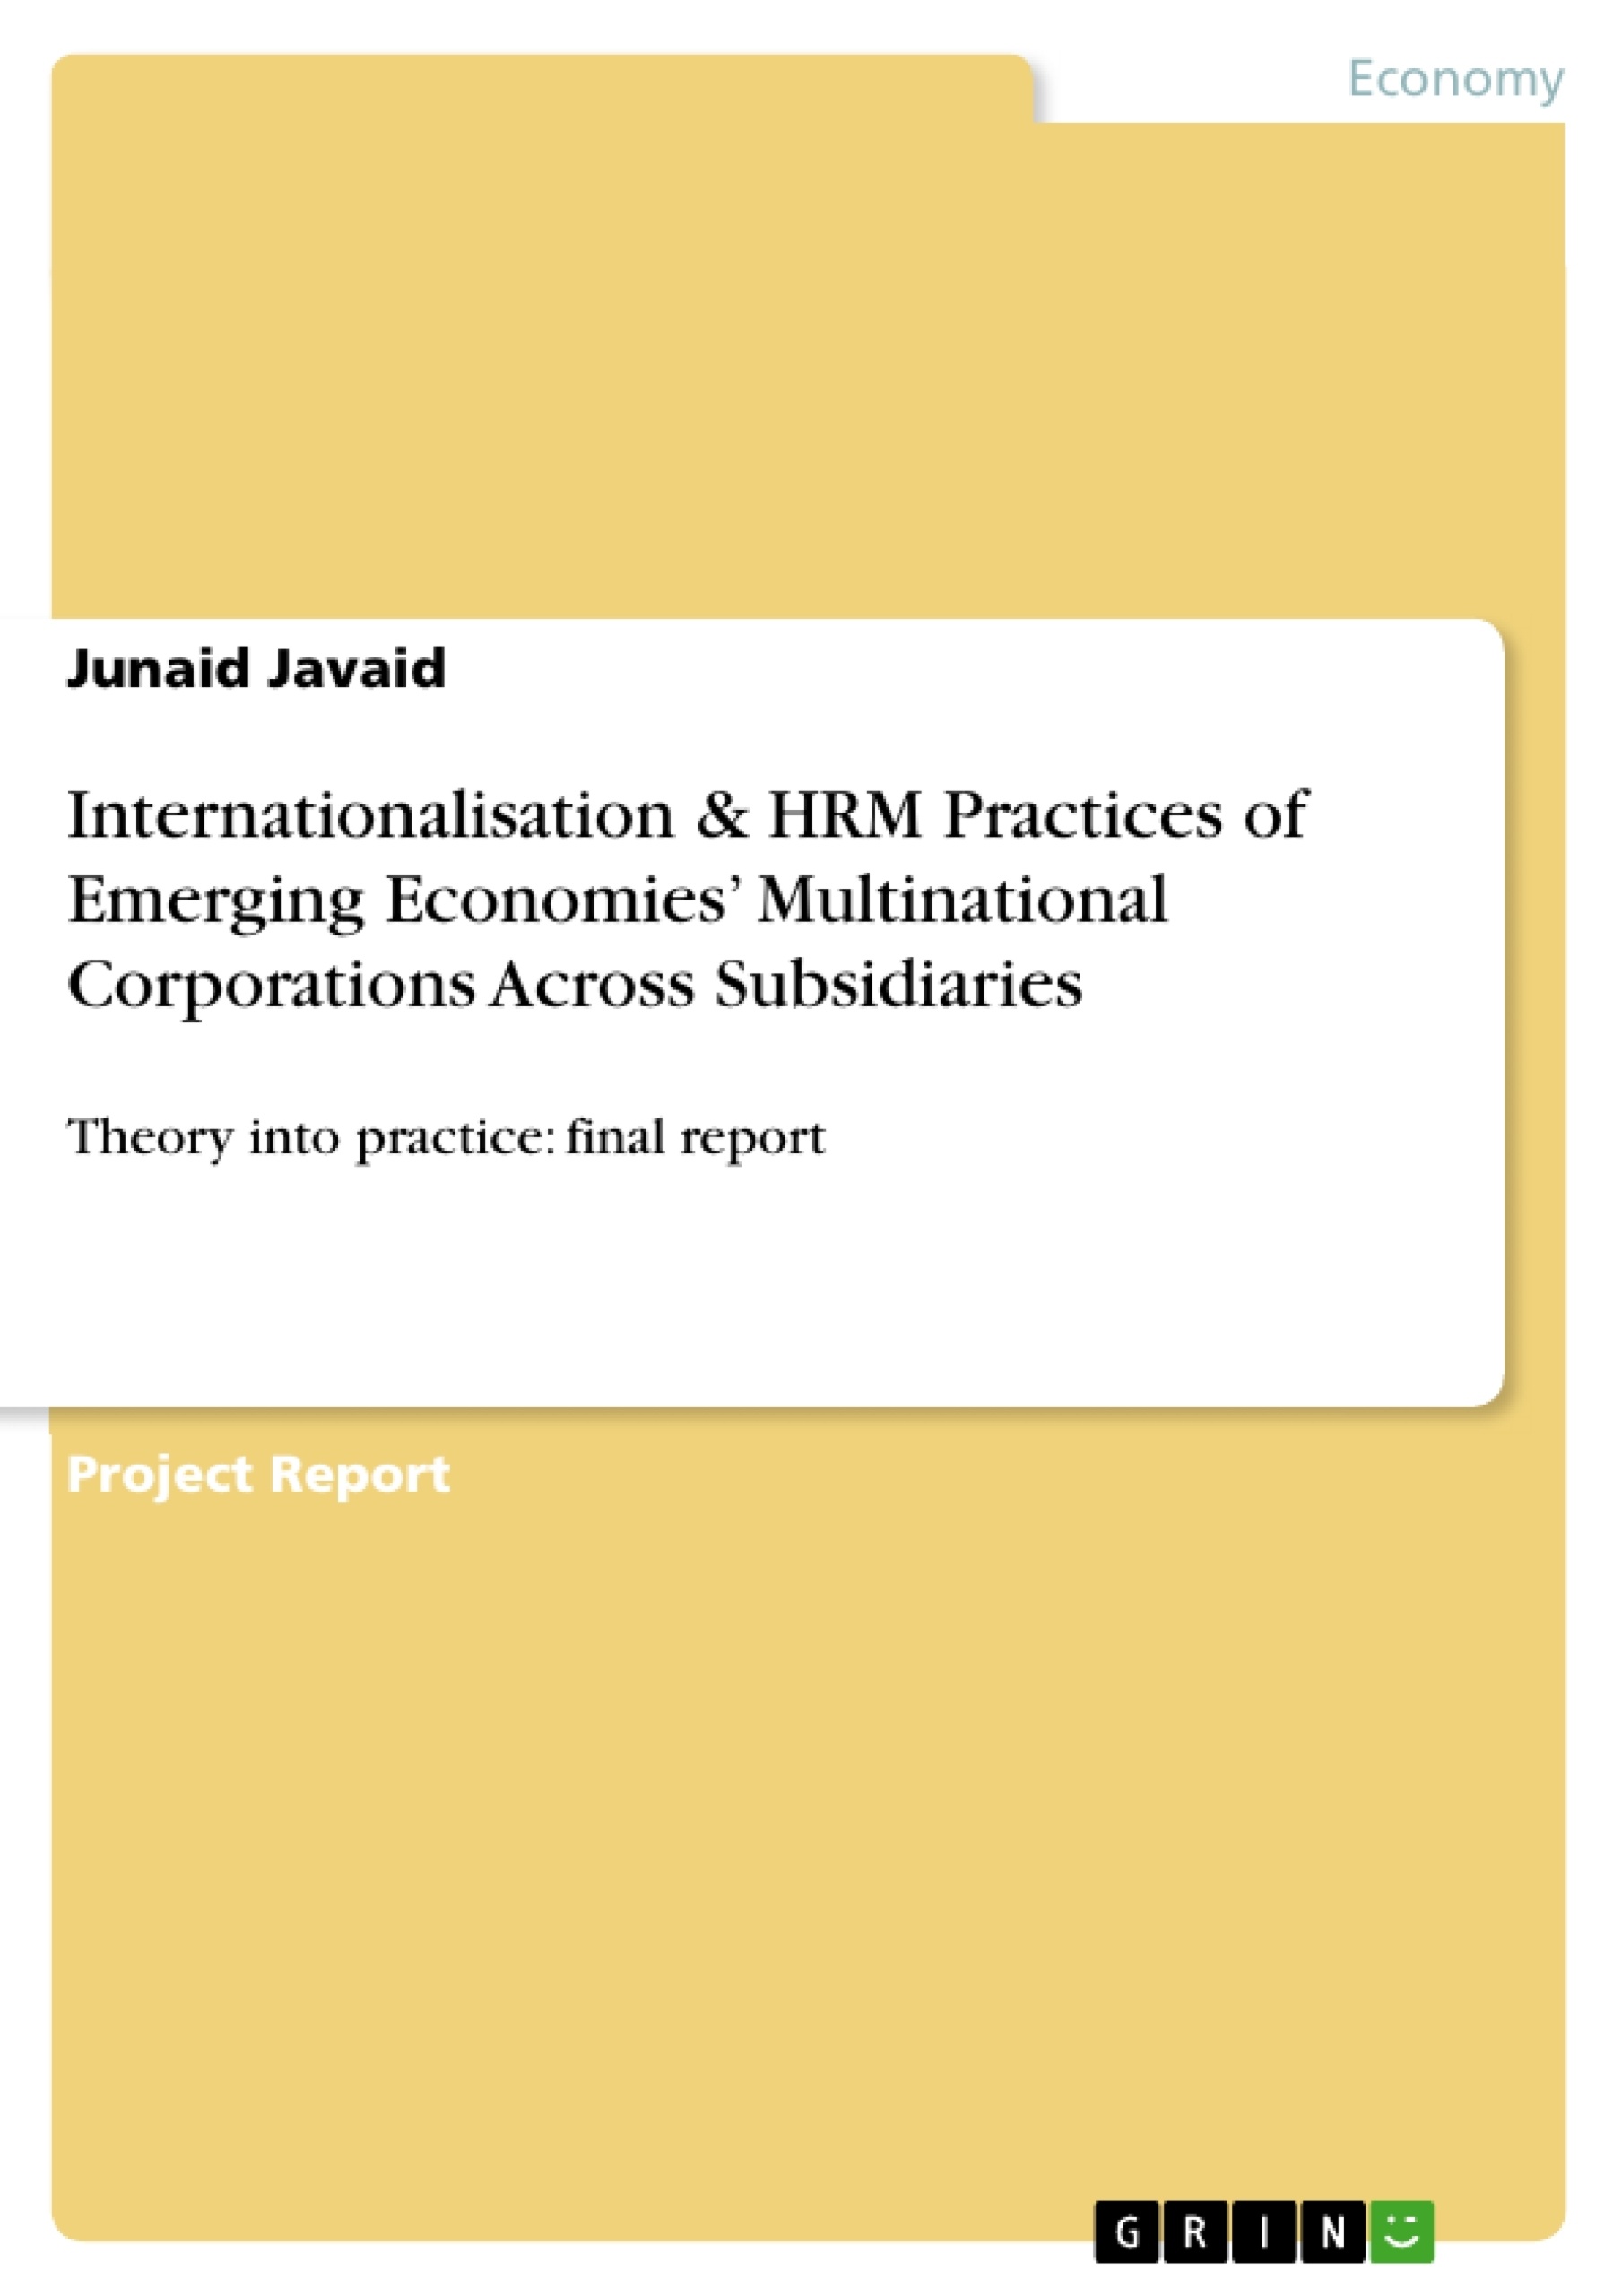 Title: Internationalisation & HRM Practices of Emerging Economies’ Multinational Corporations Across Subsidiaries